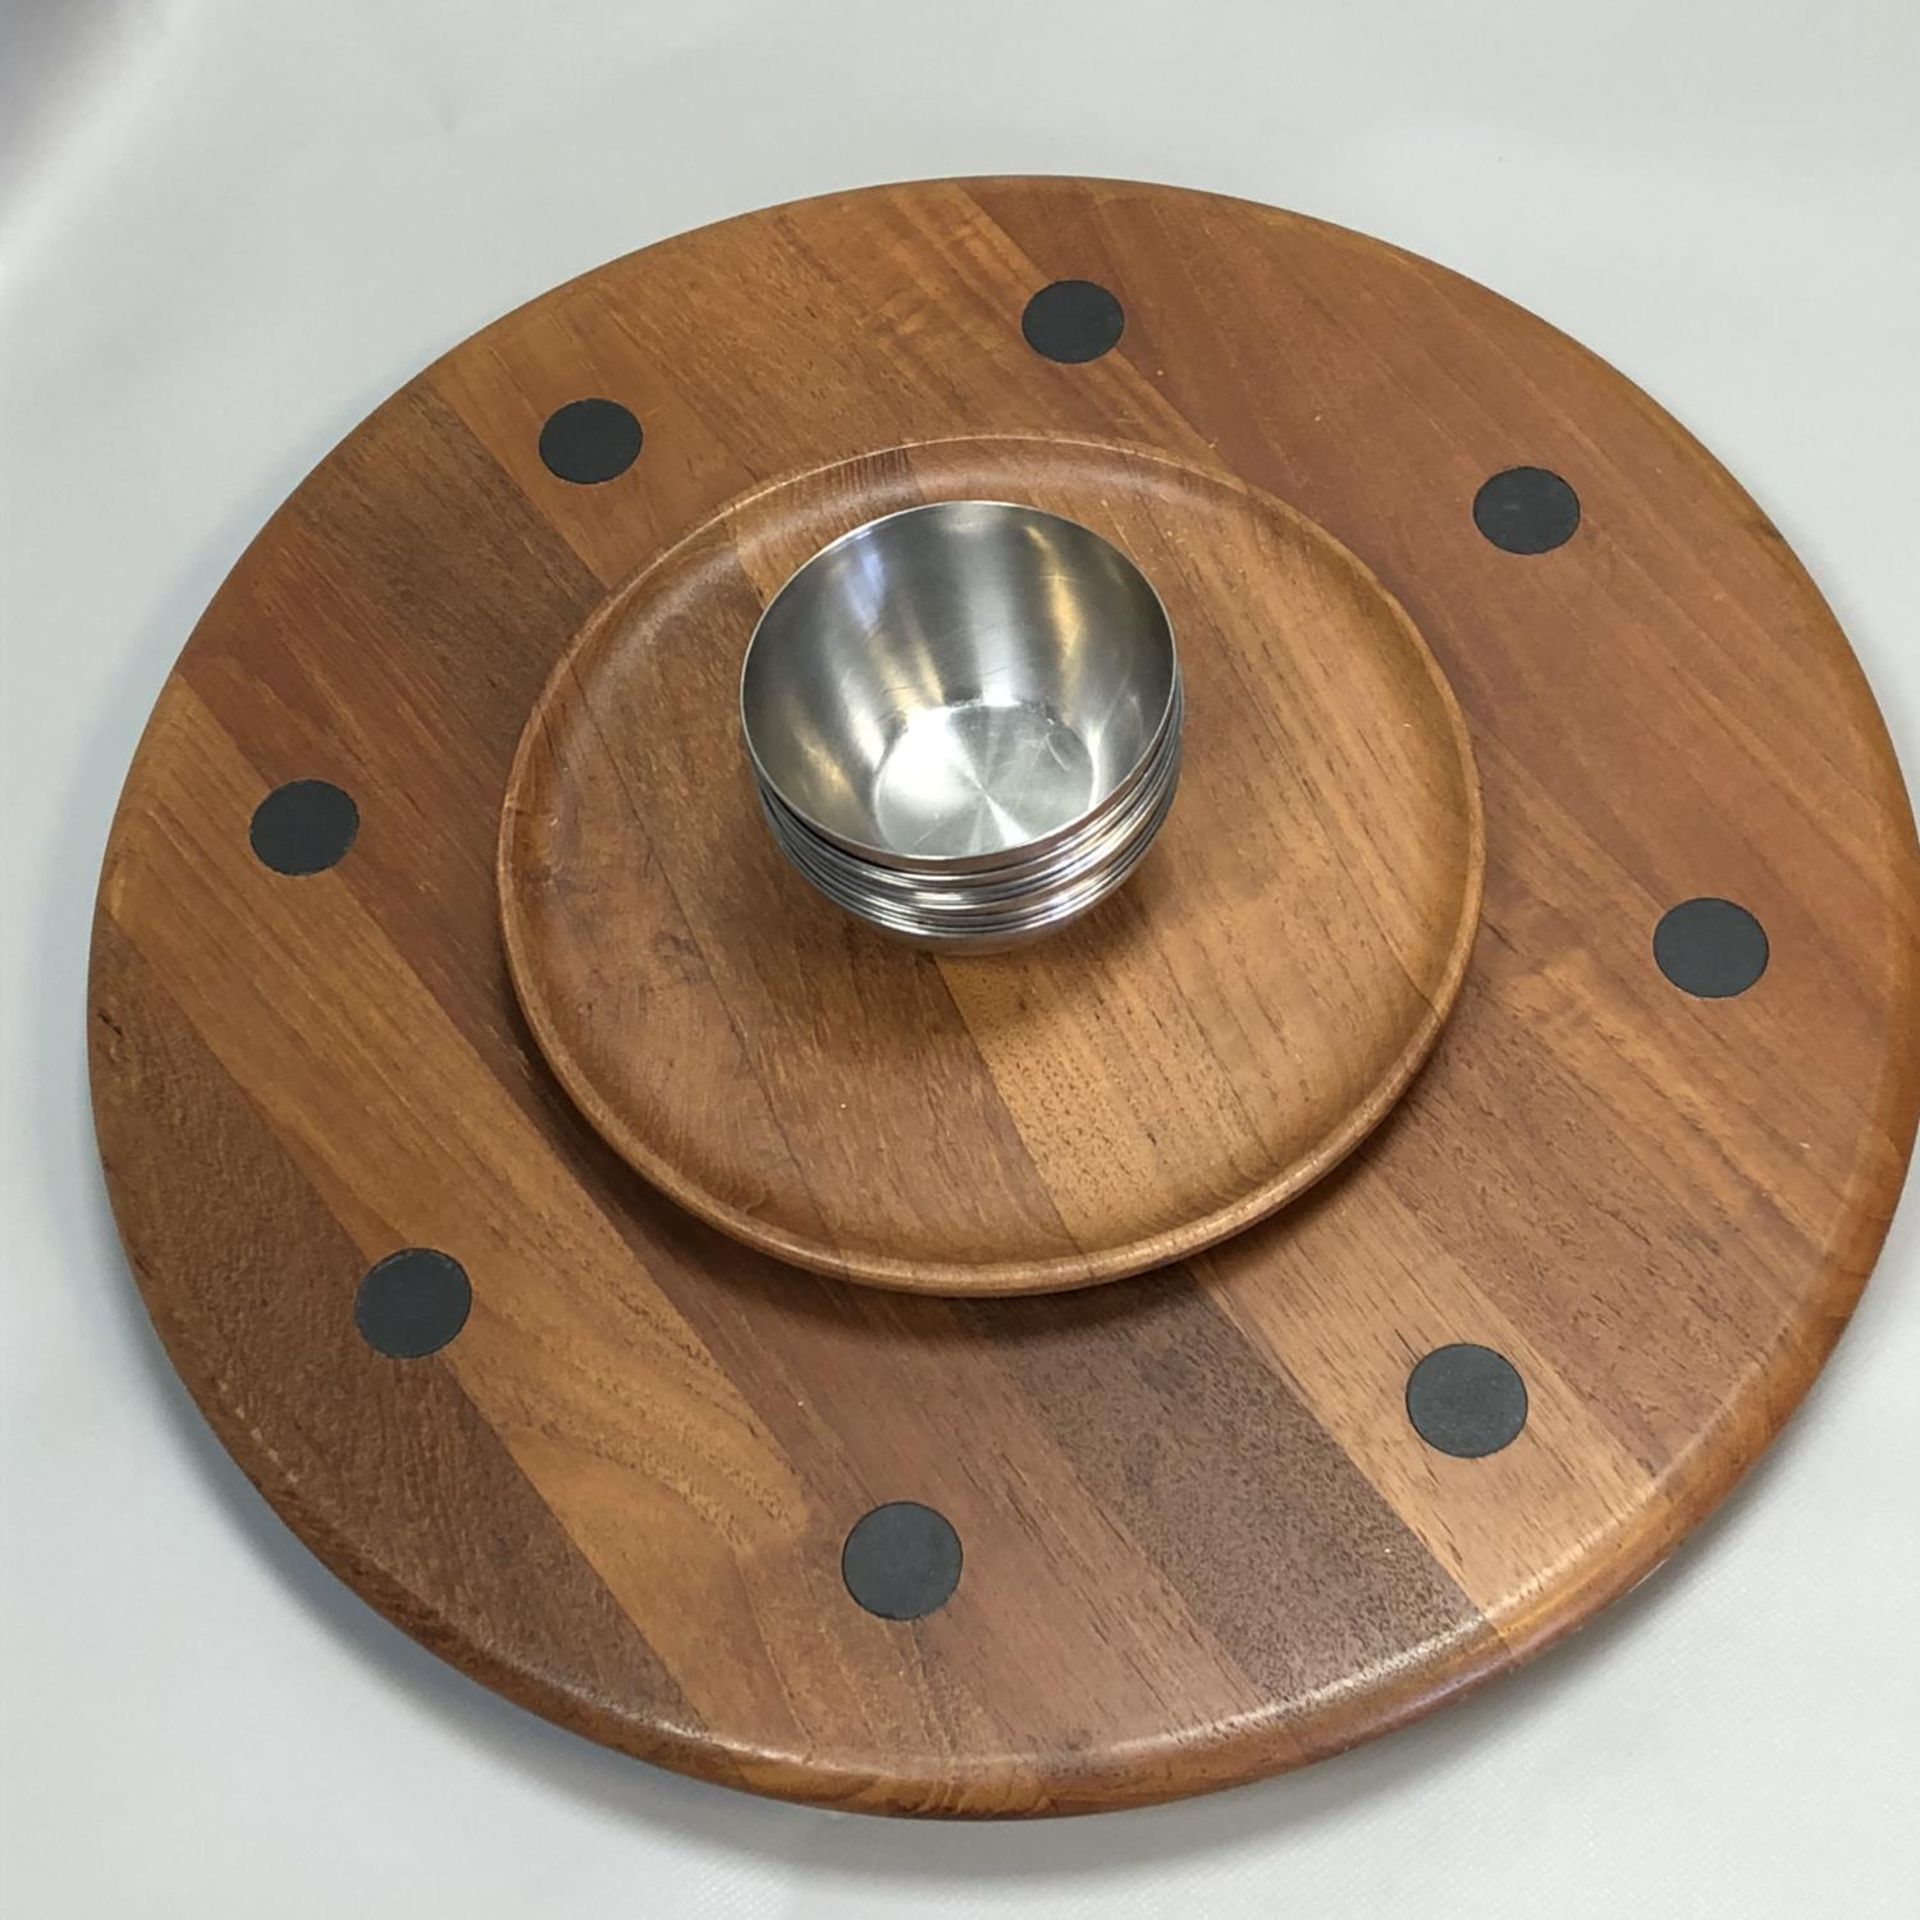 Large Wooden Lazy Susan with stainless steel bowls - Digsmed - Denmark - Image 3 of 4